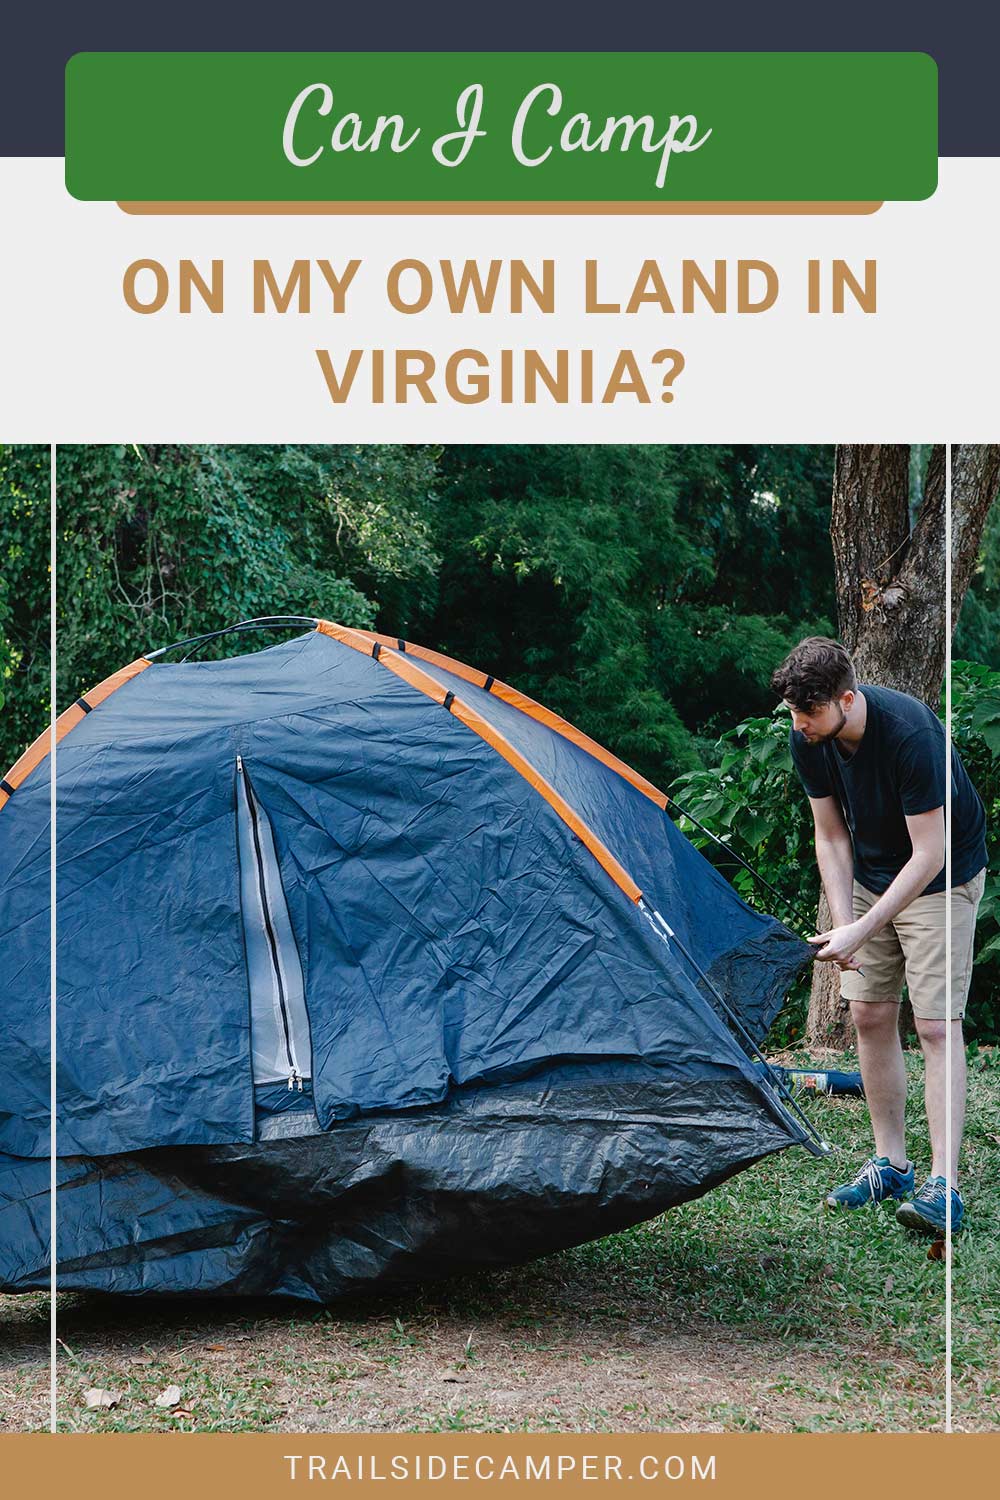 Can I Camp on My Own Land in Virginia?